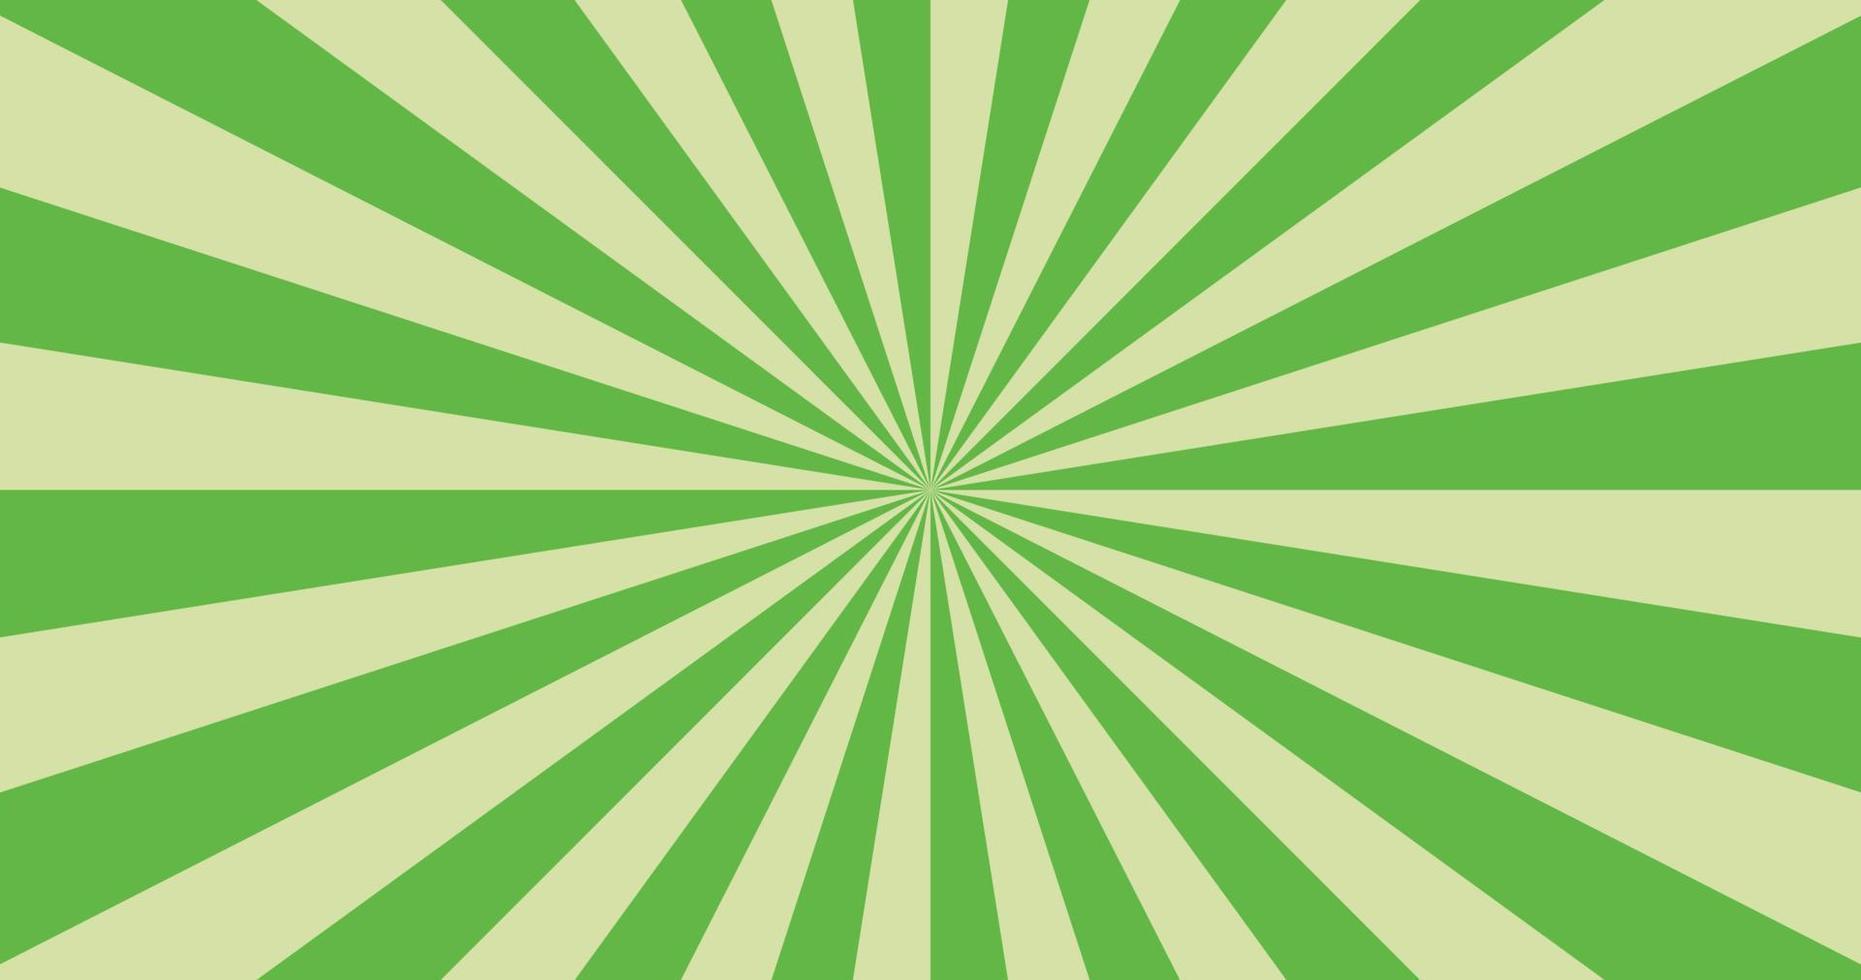 Abstract explosion background in gradient green color. Asian style glare effect. Sunshine sparkle pattern. Vector illustration of a radial ray. Narrow beam. For backdrops, posters, banners, covers.